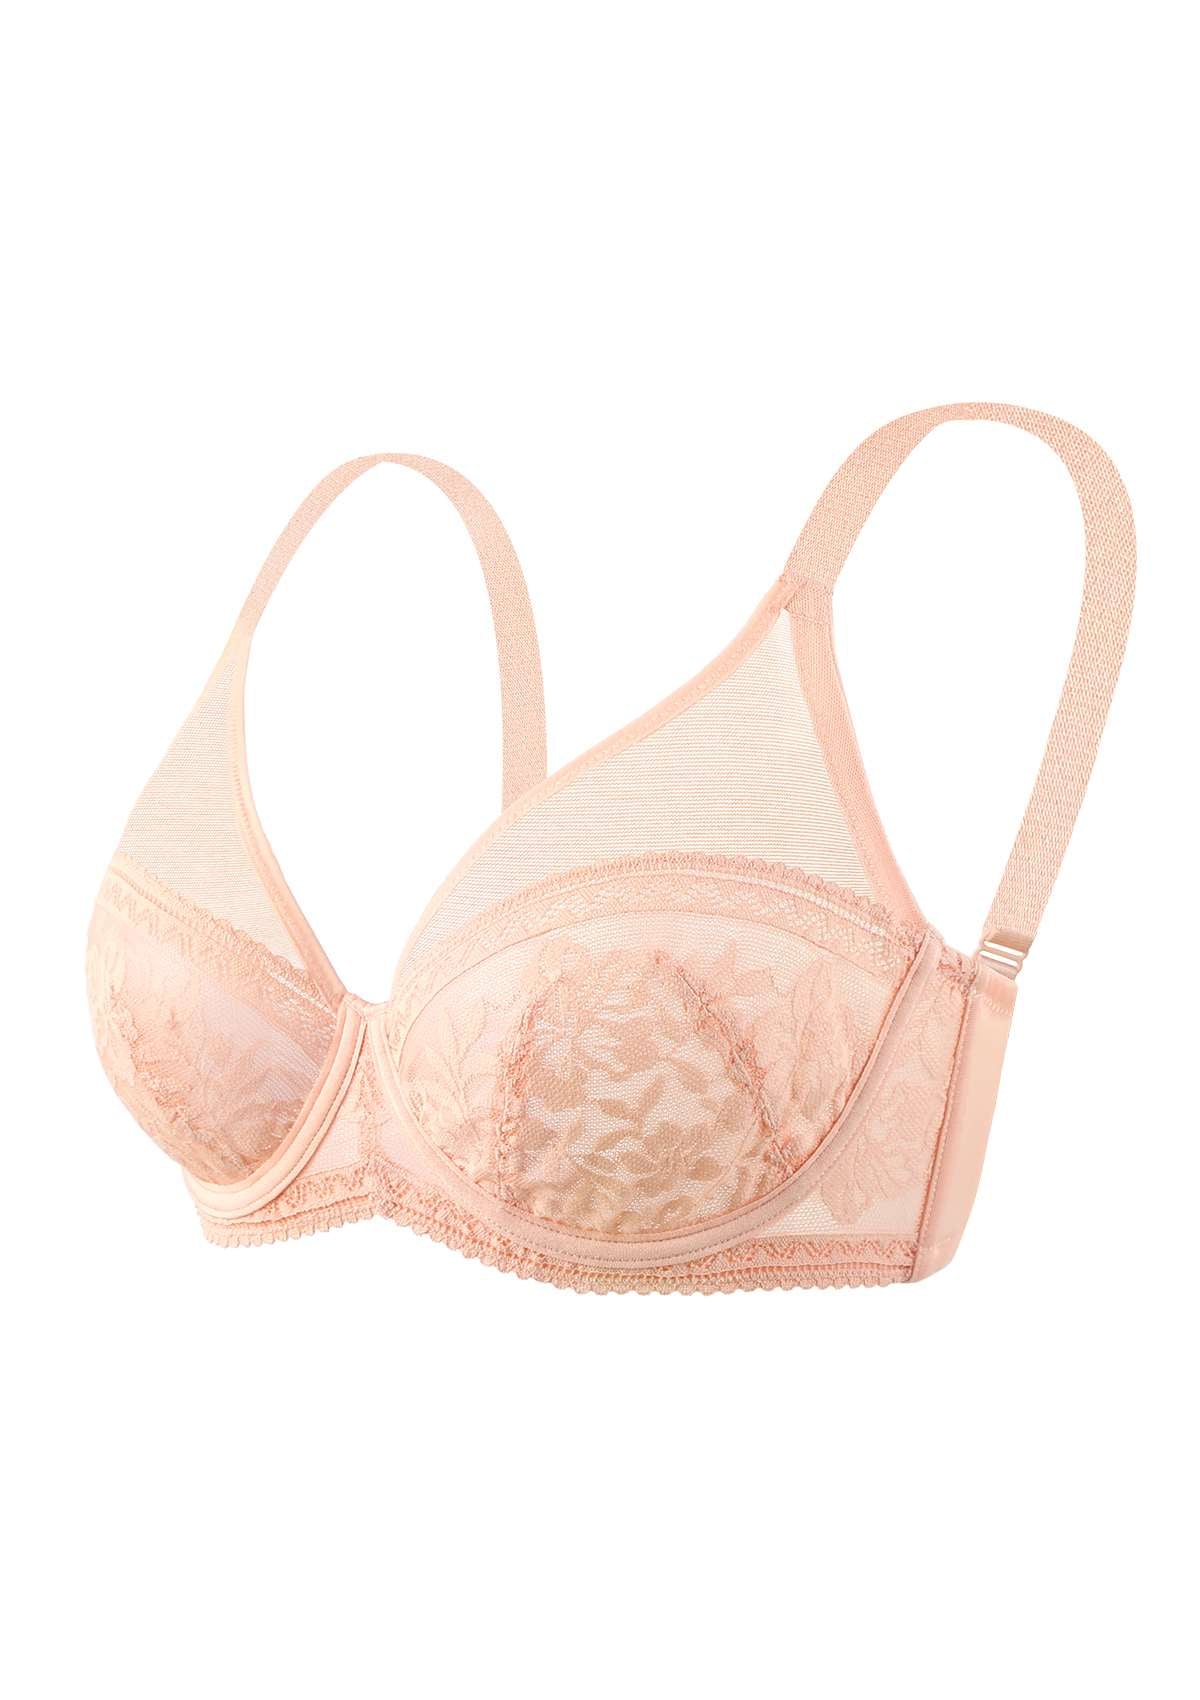 HSIA Gladioli Lace Mesh Minimizing Unlined Underwire Bra For Fuller Busts - Peach / 44 / D